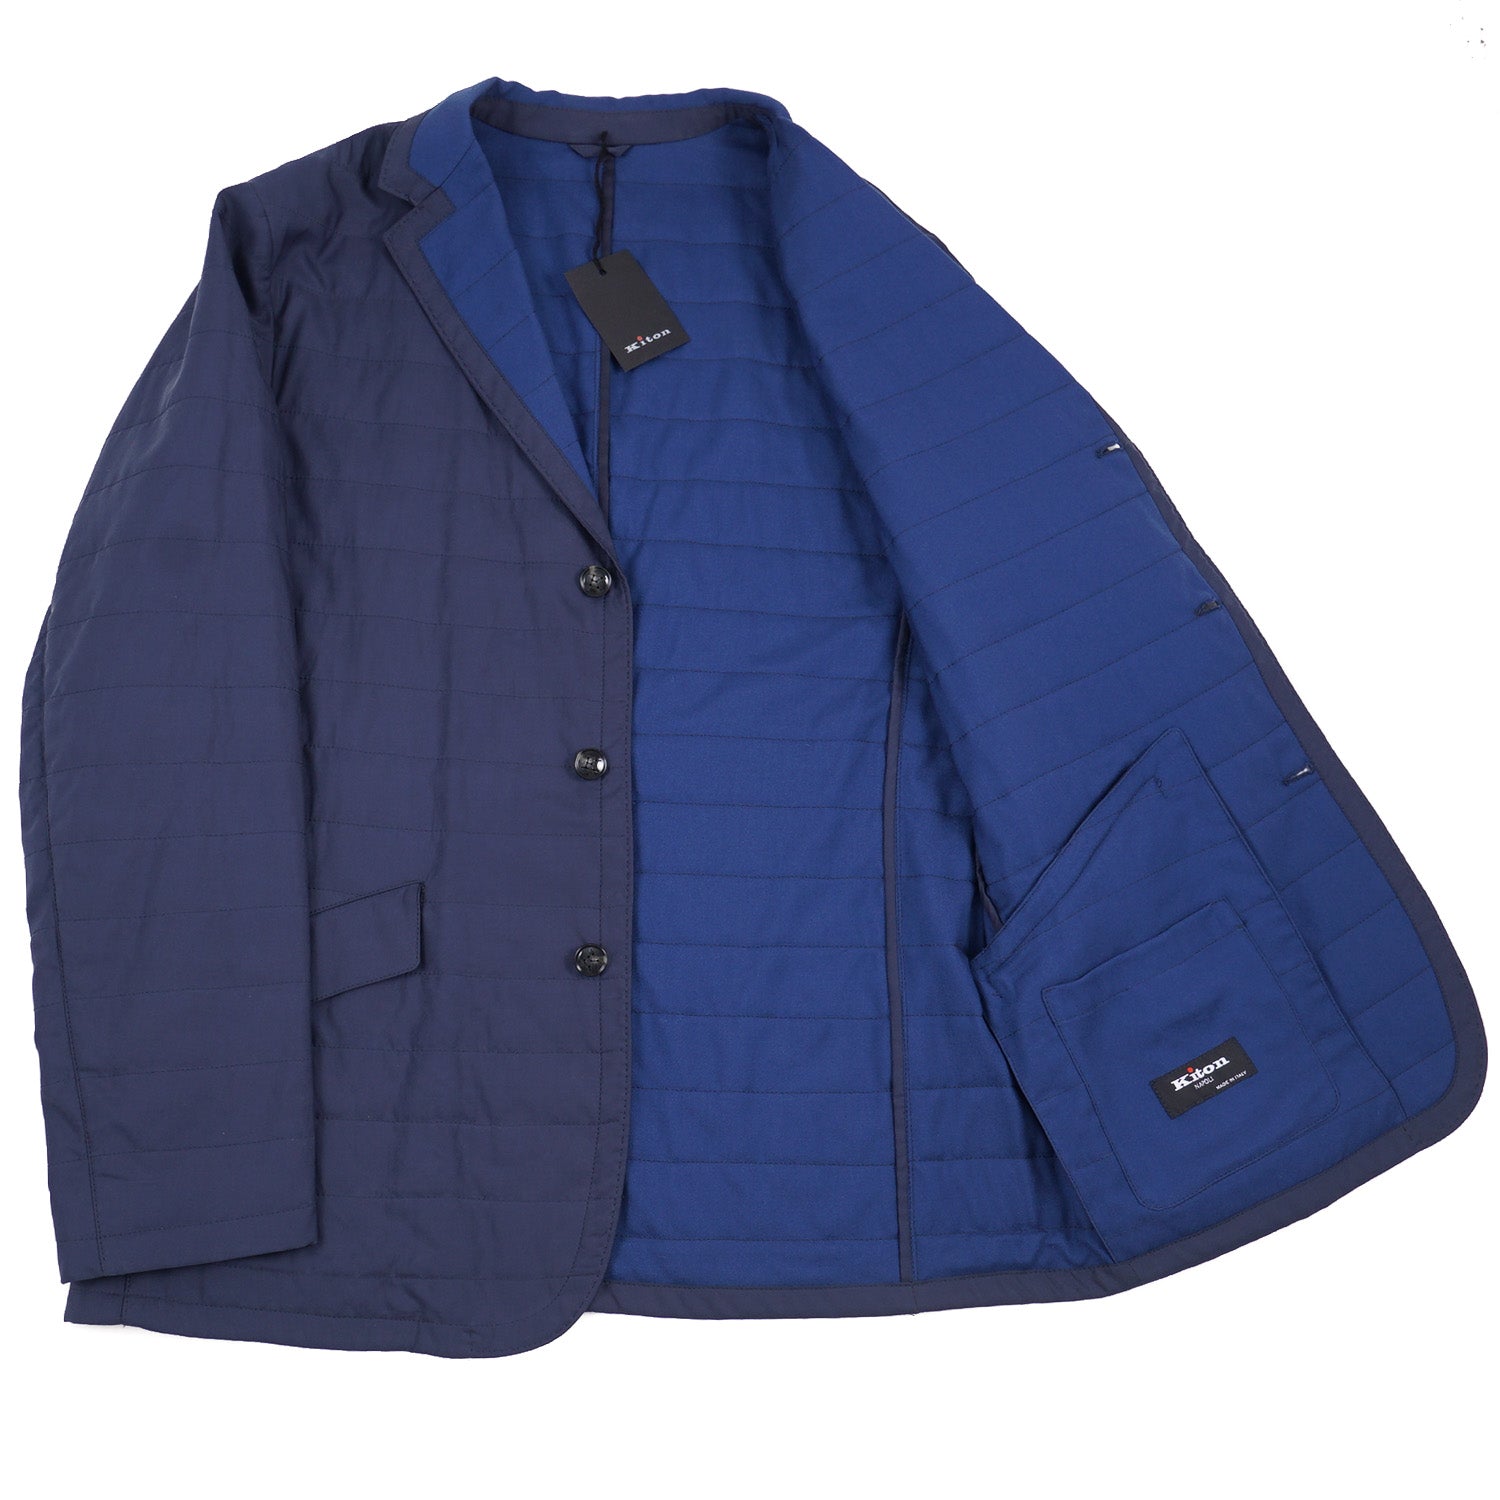 Kiton Quilted Blazer with Cashmere Lining - Top Shelf Apparel